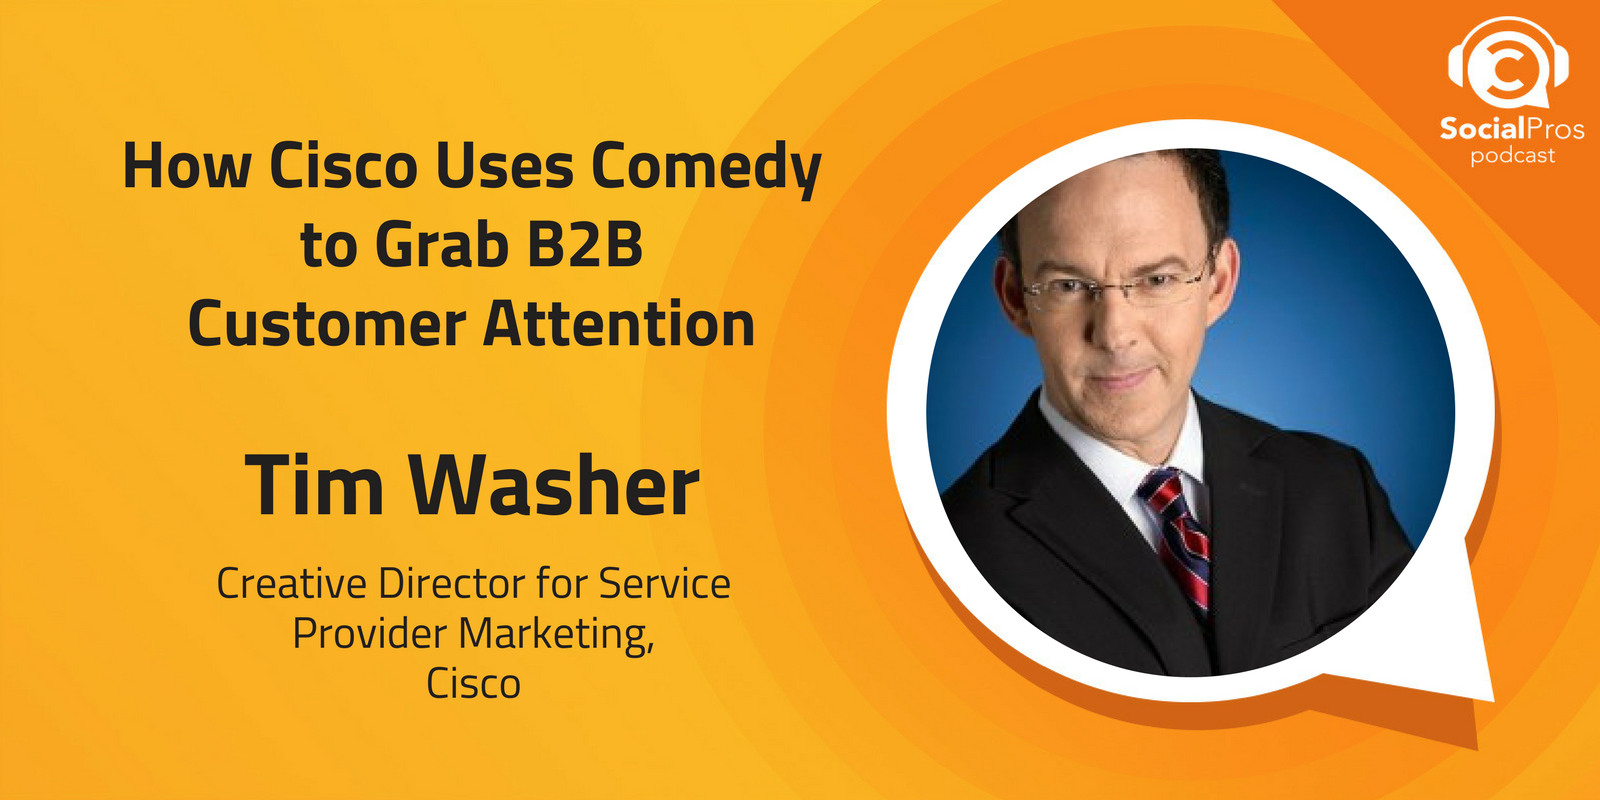 How Cisco Uses Comedy to Grab B2B Customer Attention